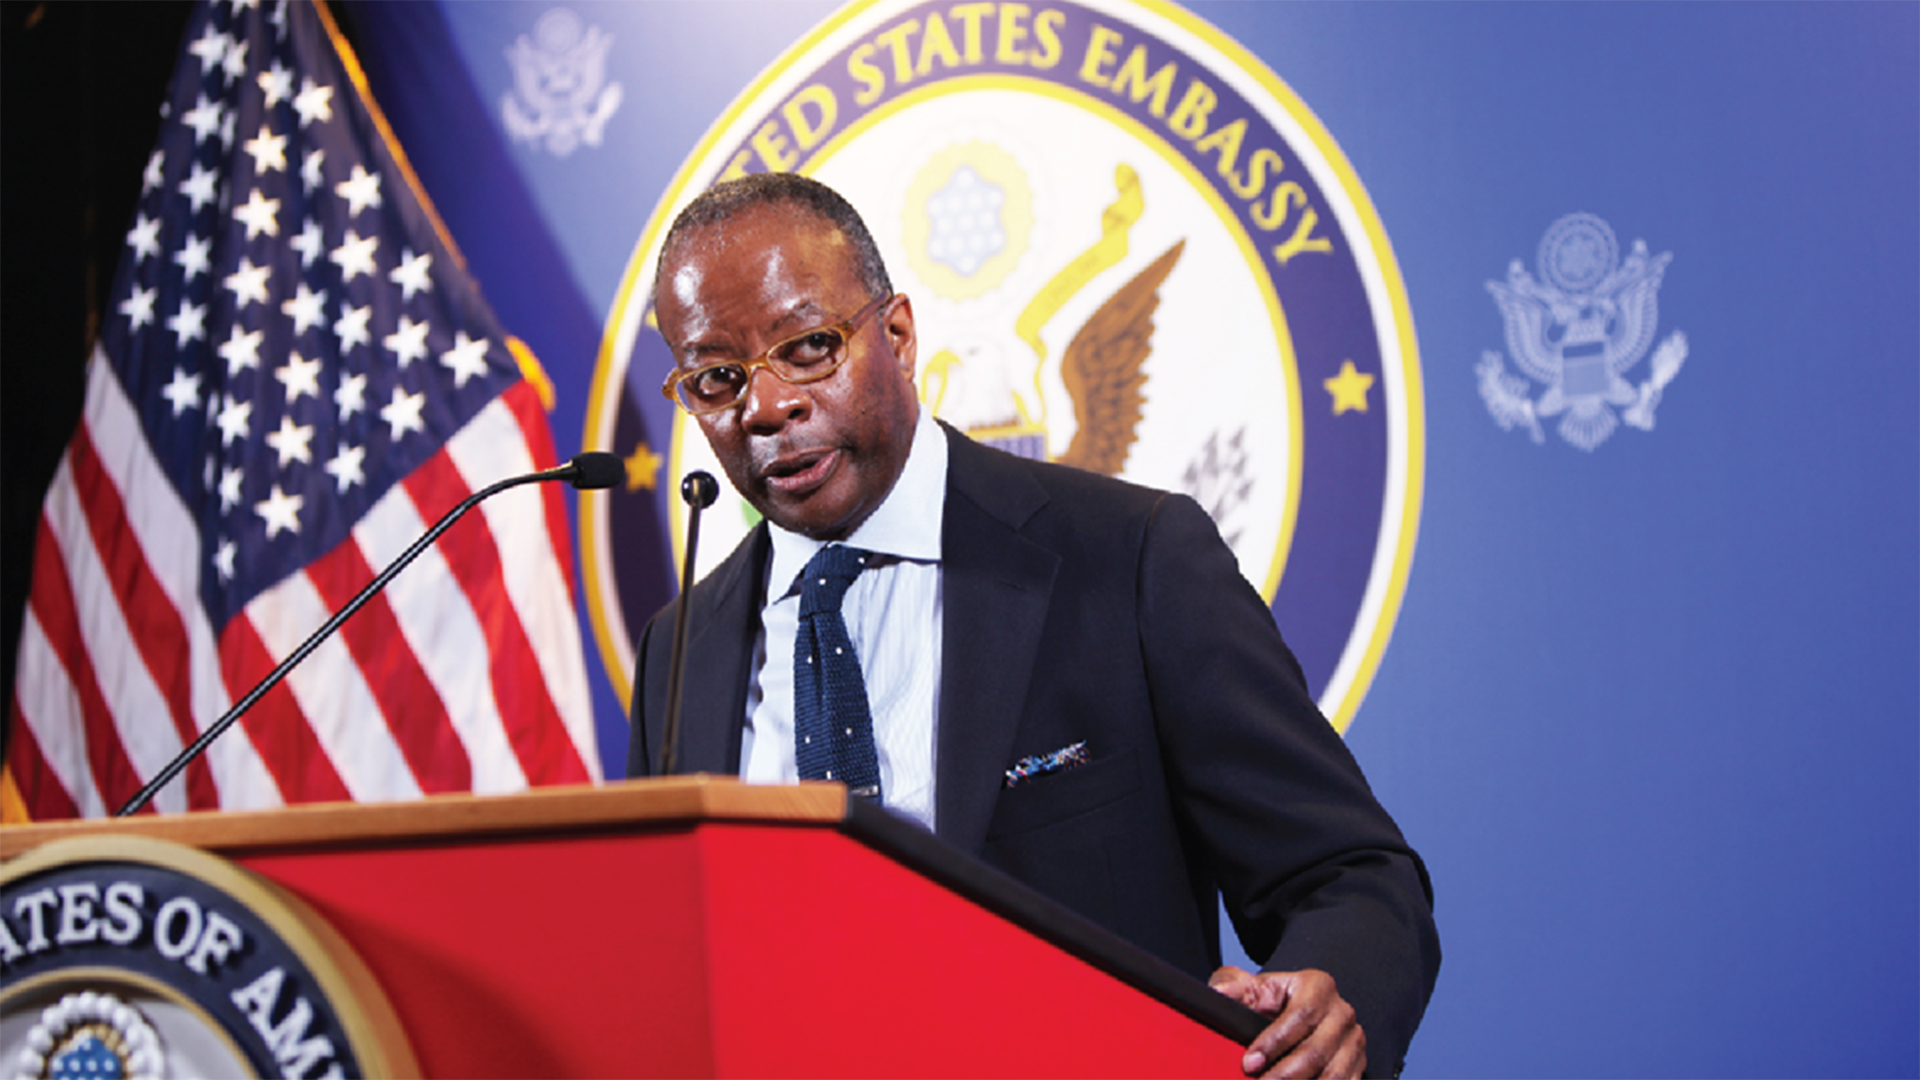 Todd Robinson, US Assistant Secretary of State for International Narcotics and Law Enforcement Affairs